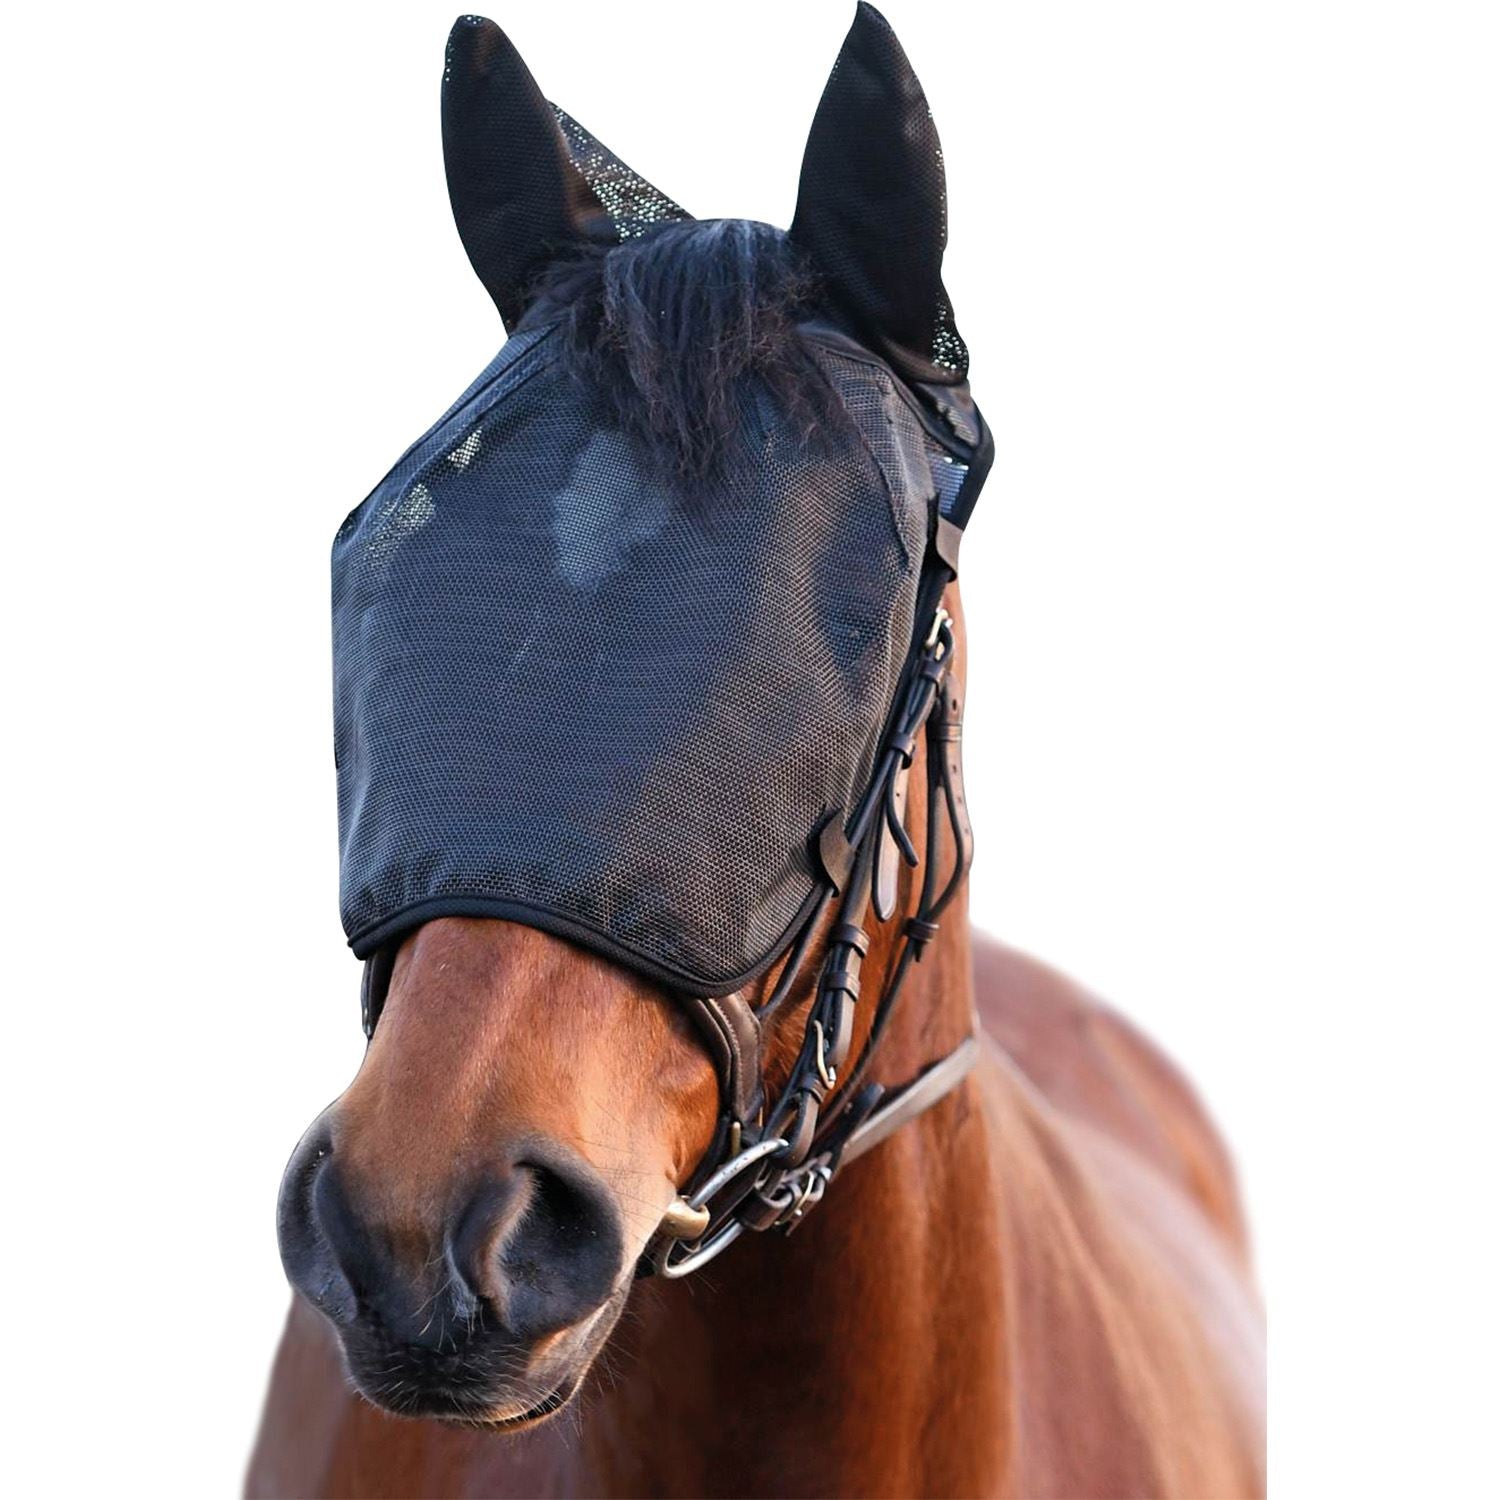 Equilibrium Net Relief Riding Mask - Just Horse Riders